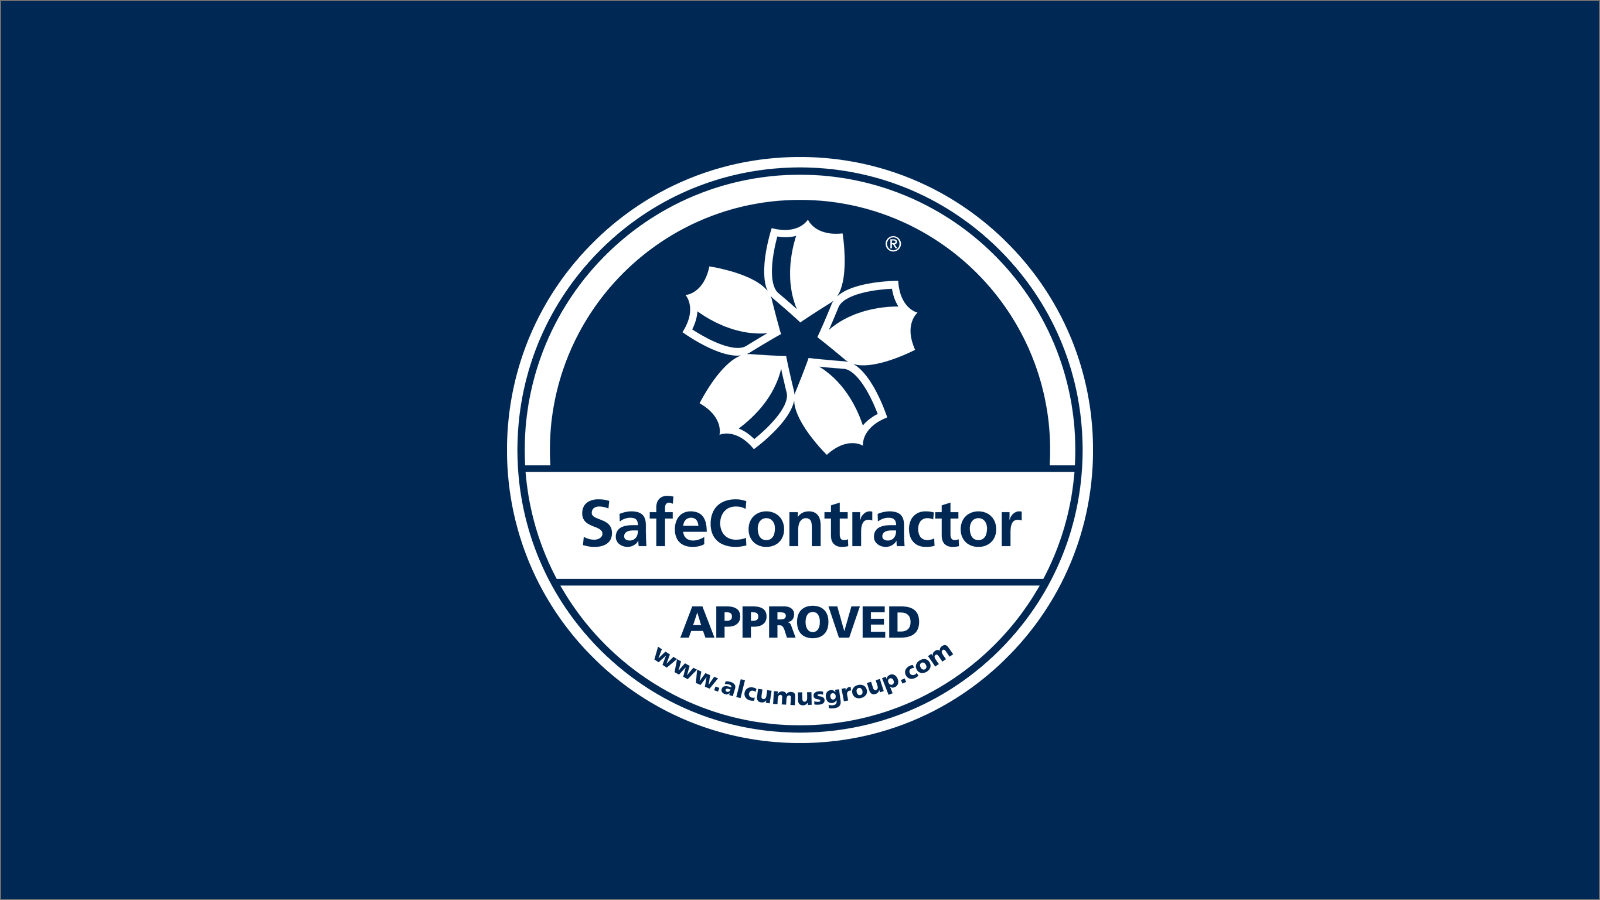 SafeContractor accreditation - security solutions